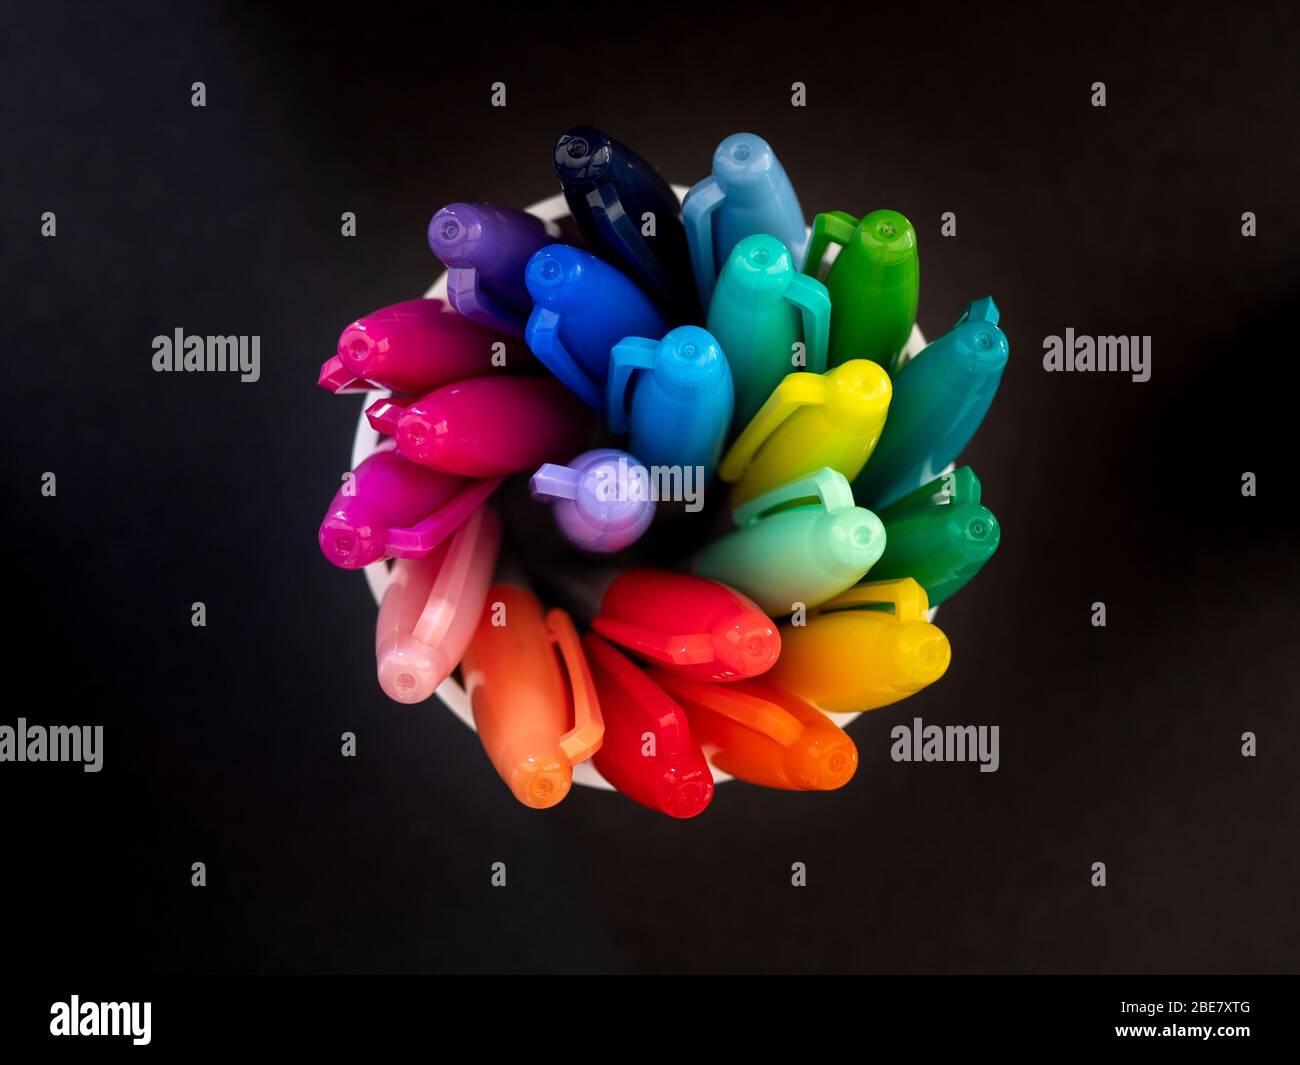 Top down view of colouring pens spiralling in a pot against a black background Stock Photo